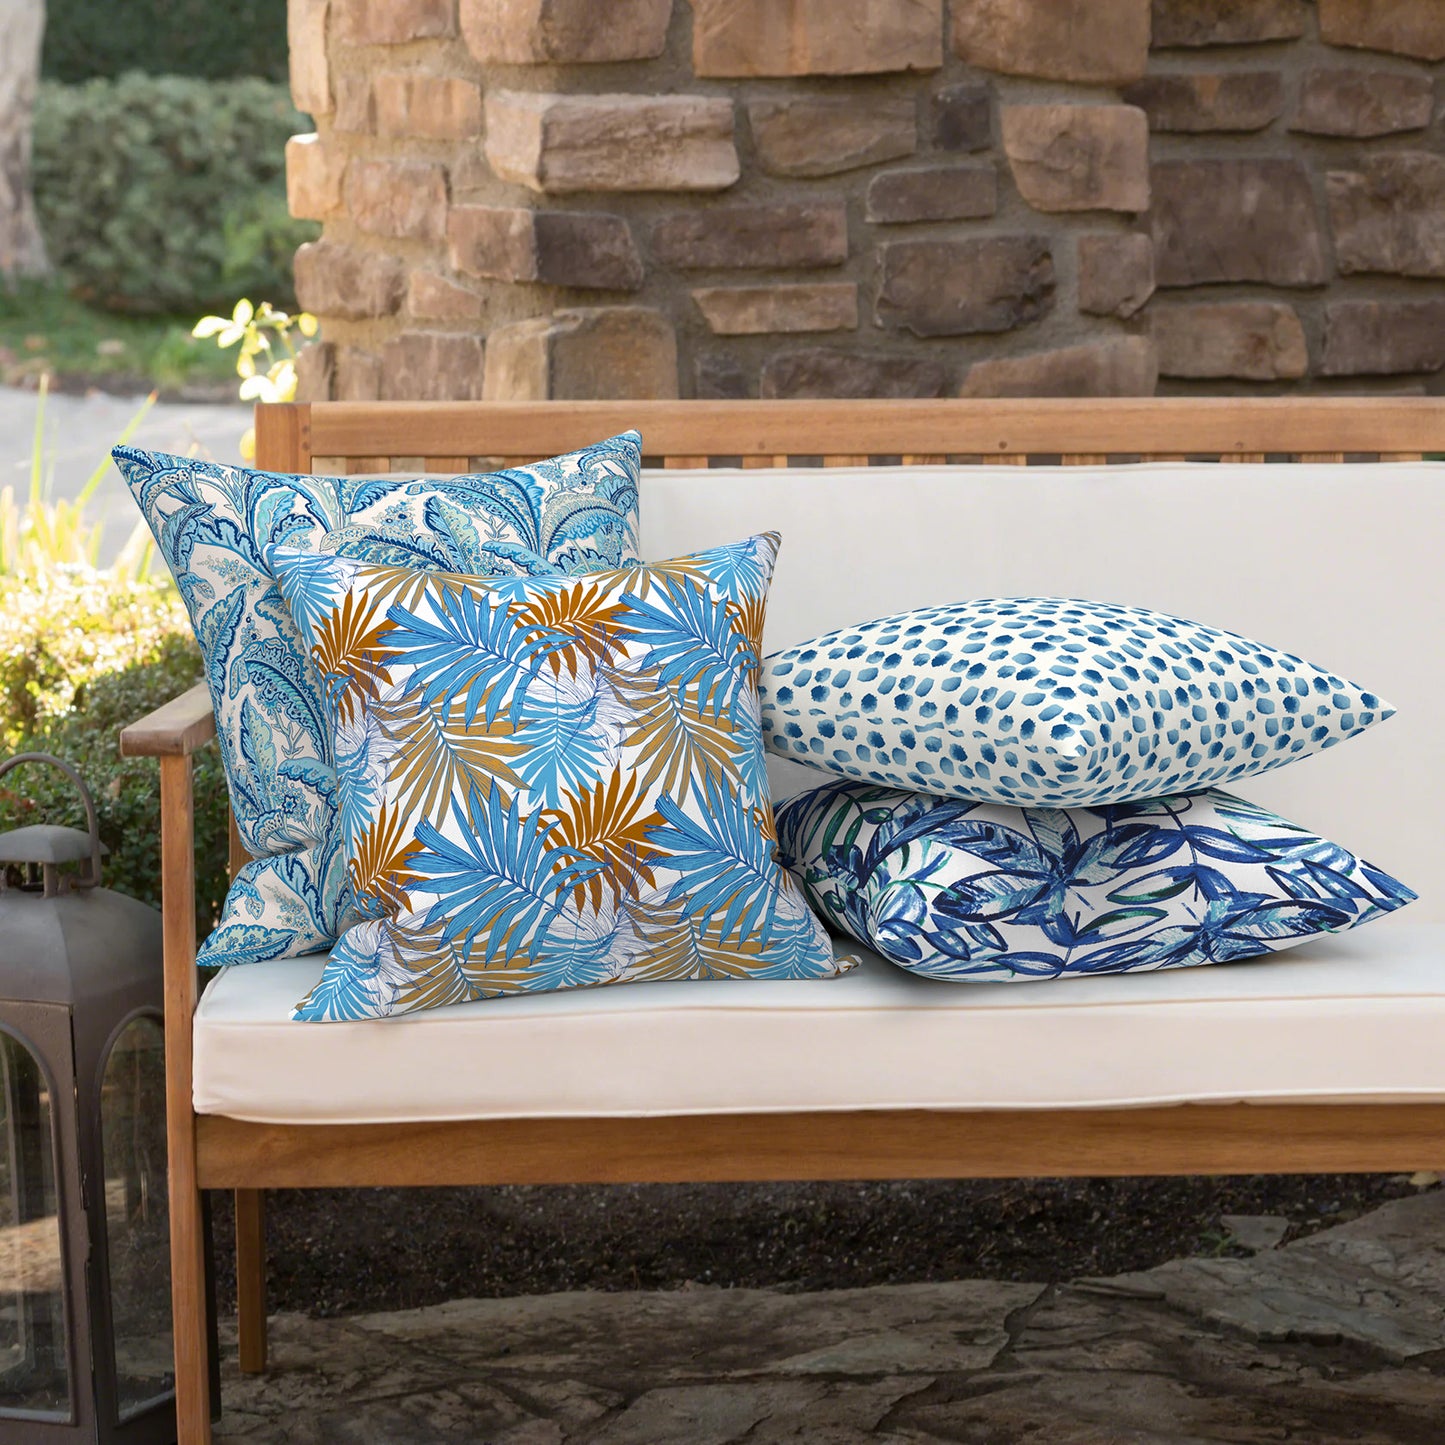 Melody Elephant Outdoor Throw Pillows 16x16 Inch, water Repellent patio pillows with Inners set of 2, outdoor pillows for patio furniture home garden, Piermont Leaves Blue